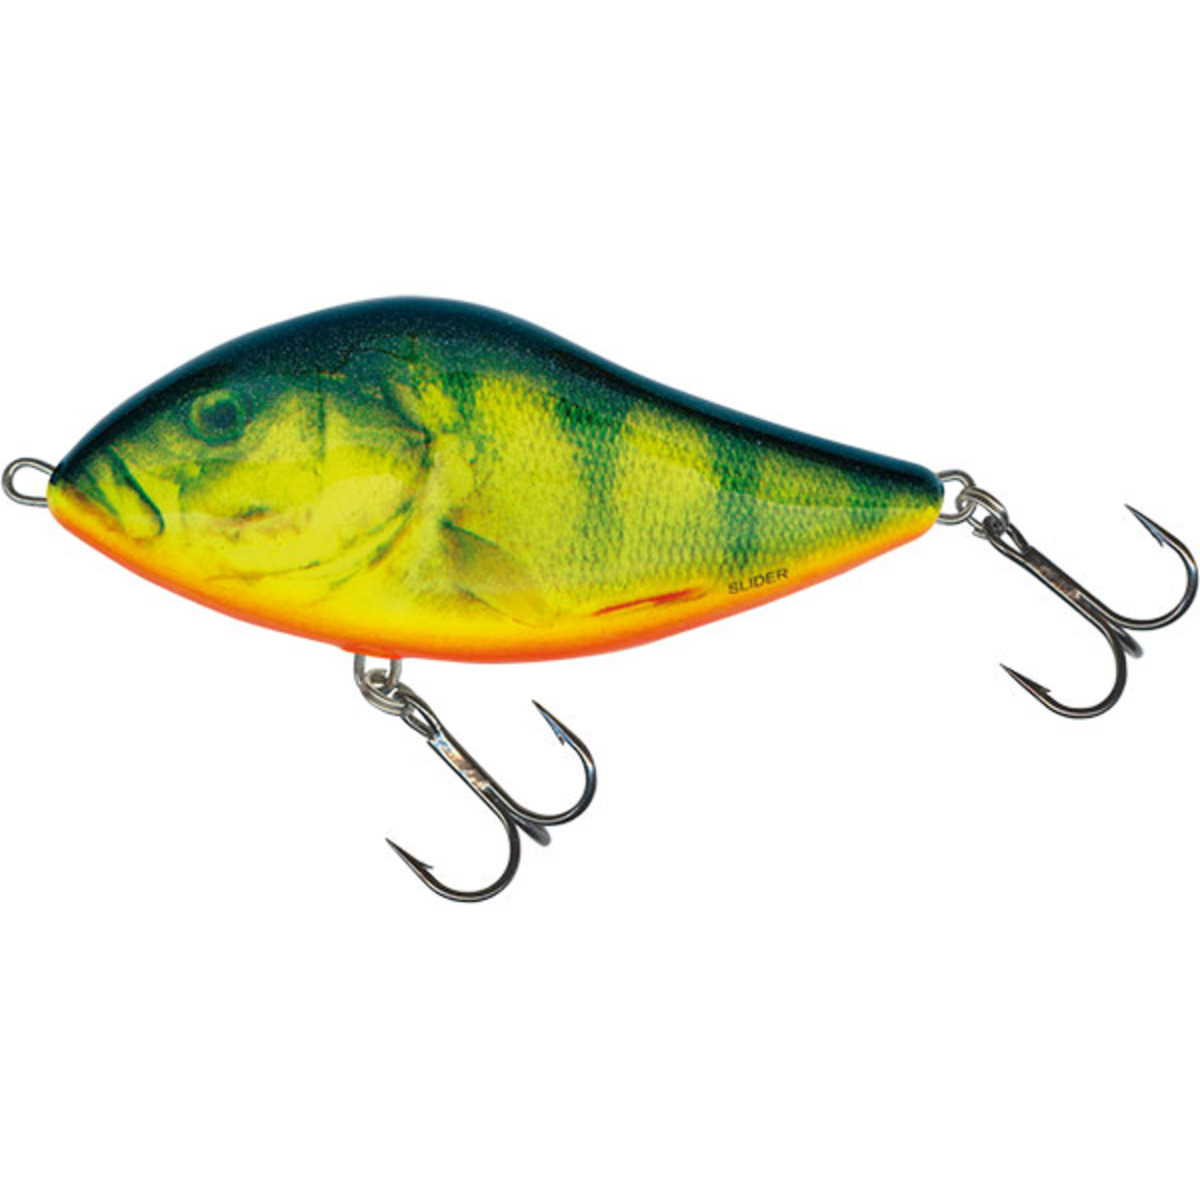 Salmo Slider Floating - 10 Cm - Real Hot Perch